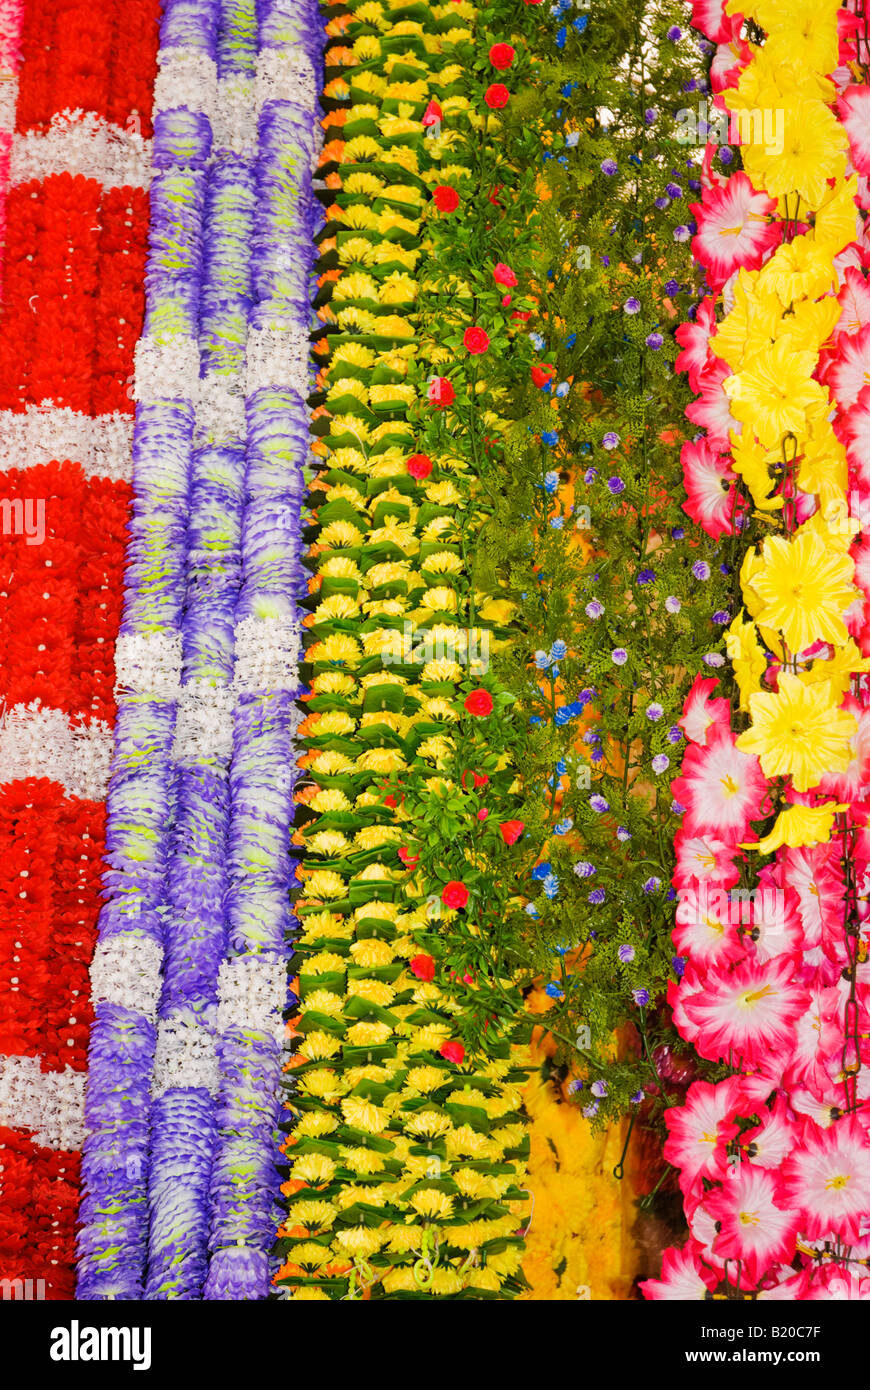 Garlands hanging in  the Little India Market in Singapore Stock Photo